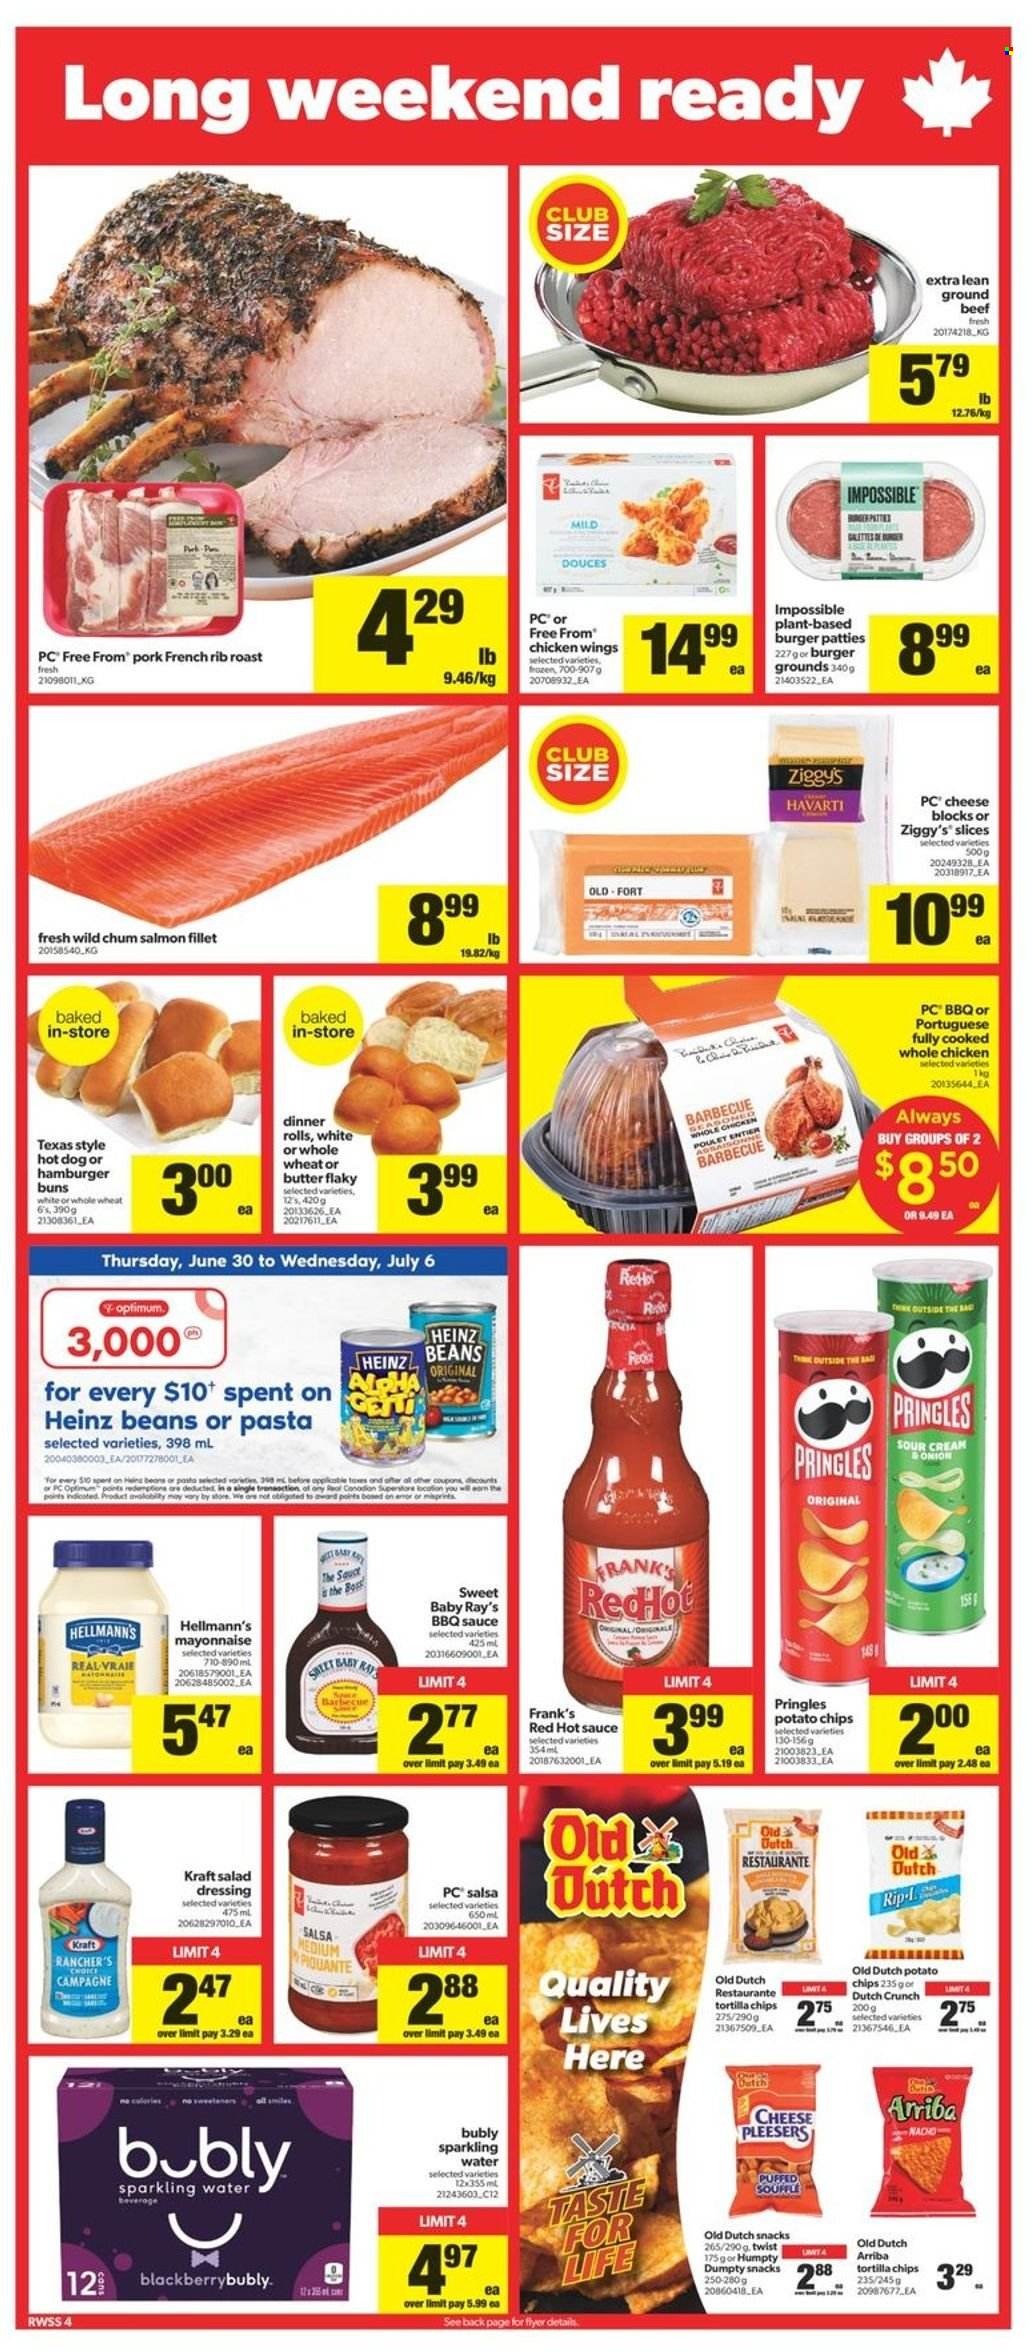 thumbnail - Circulaire Real Canadian Superstore - 30 Juin 2022 - 06 Juillet 2022 - Produits soldés - galettes, mayonnaise, chips, tortilla chips, Pringles, nacho, Heinz, Always, dressing. Page 4.